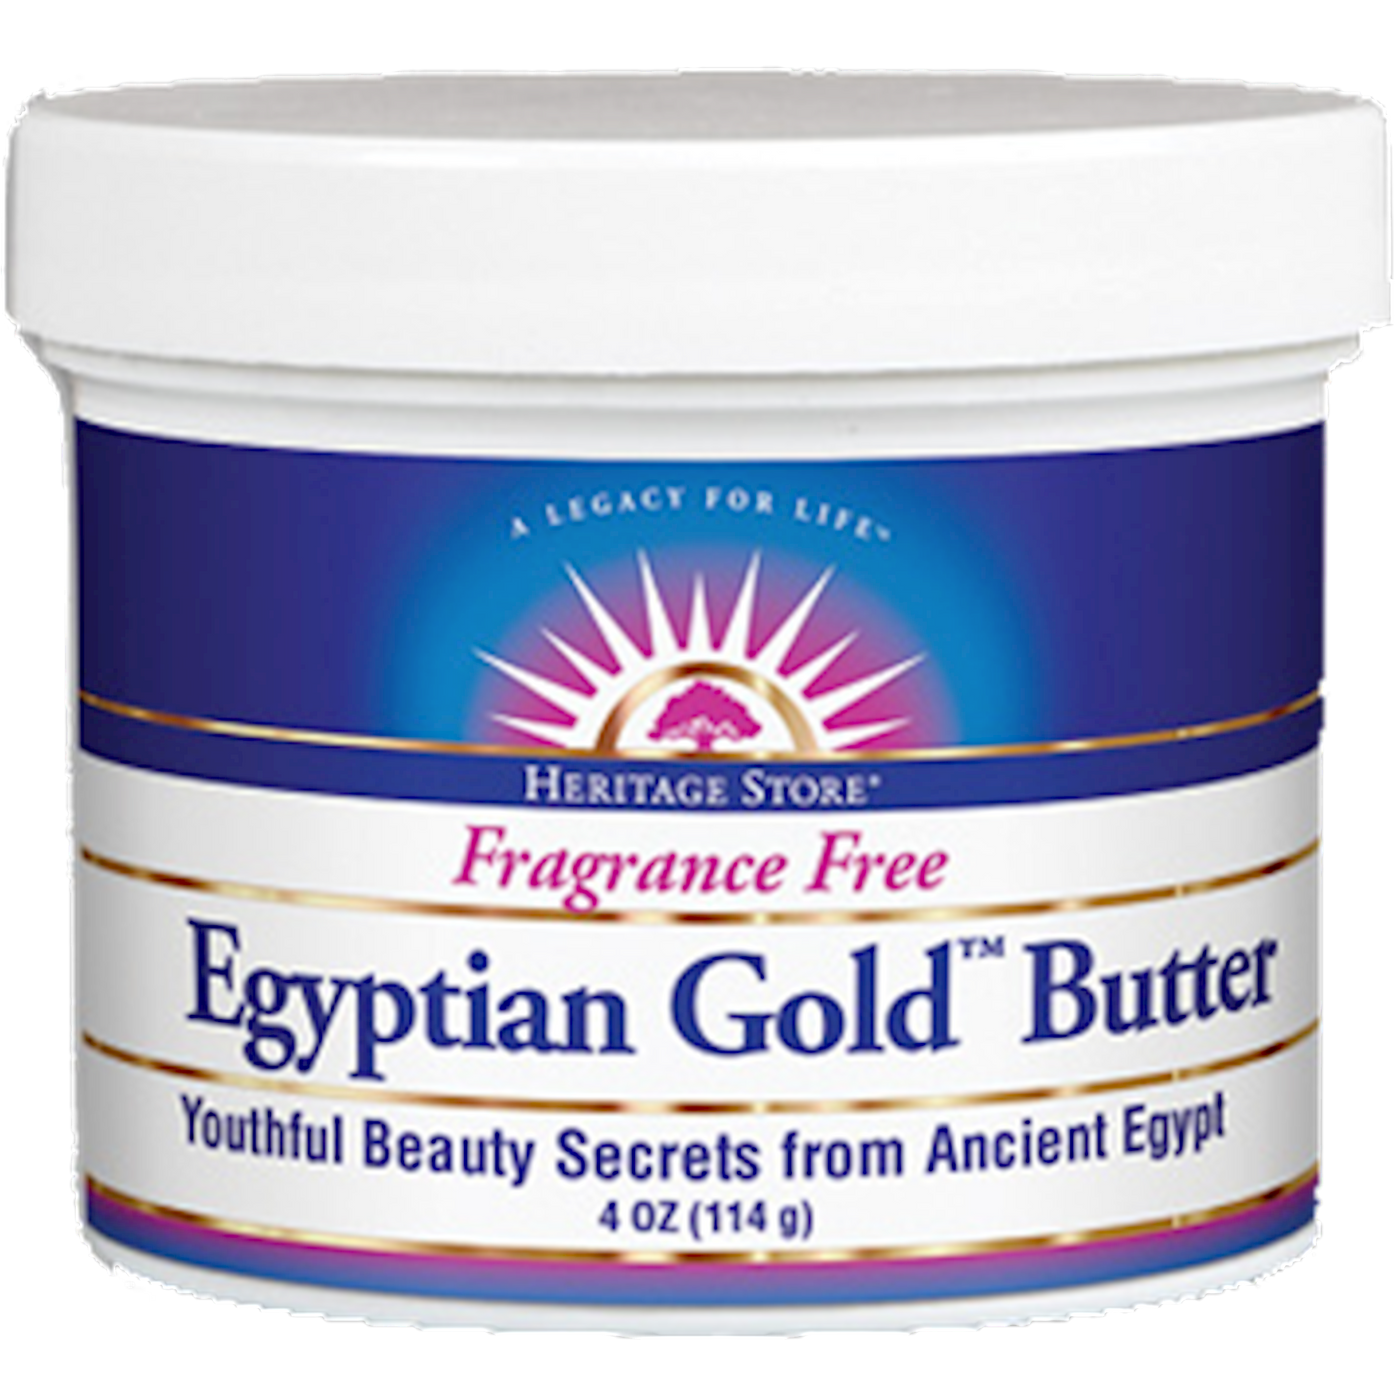 Egyptian Gold Butter Fragrance Free  Curated Wellness